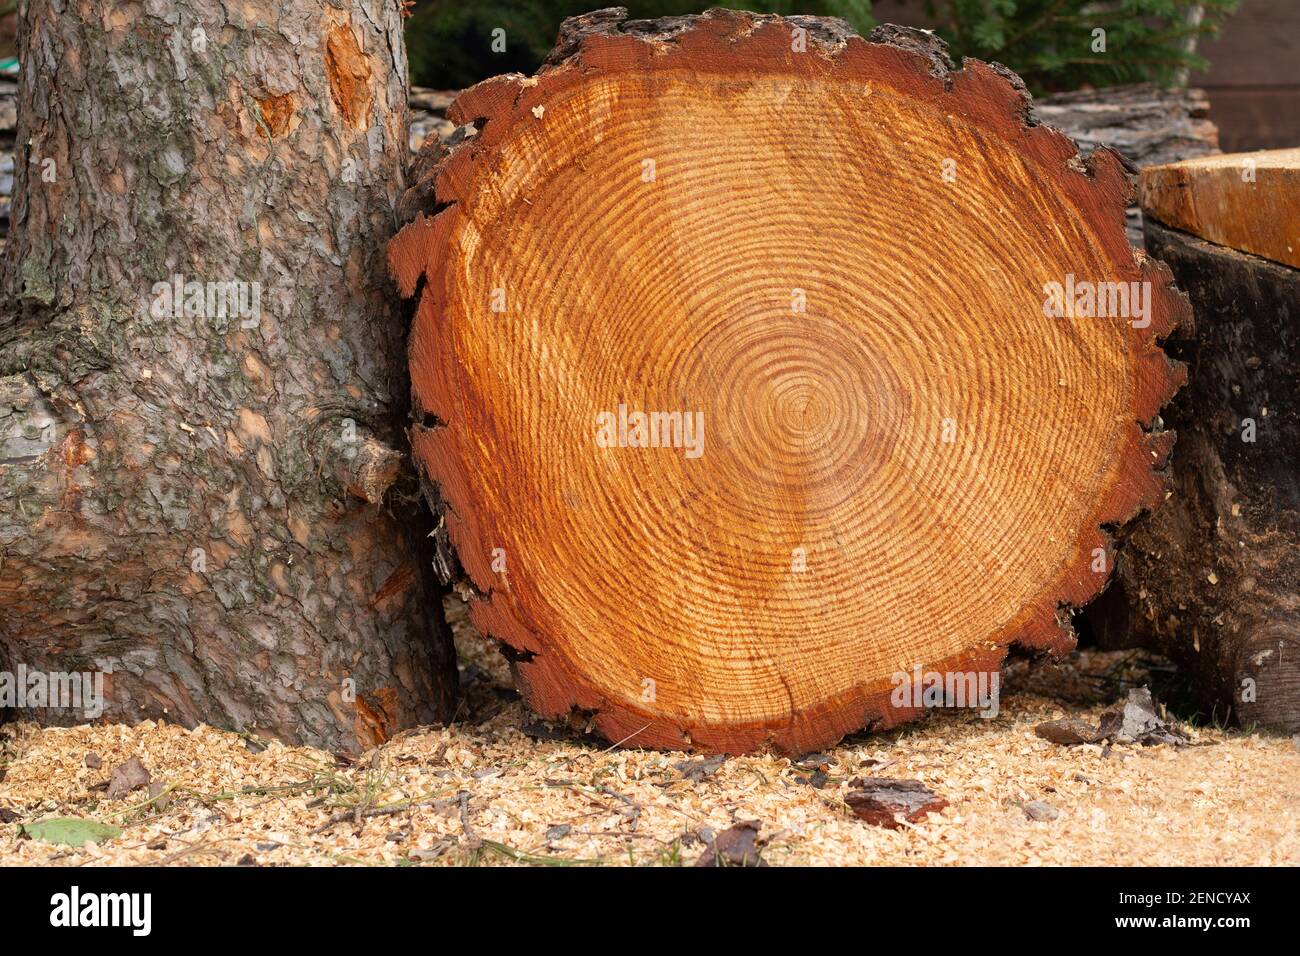 Closeup of Cherry Tree Trunk Cross-section with Annual Growth Rings. Burnt  and Cracked Wood Texture Stock Photo - Image of disc, burned: 244024918